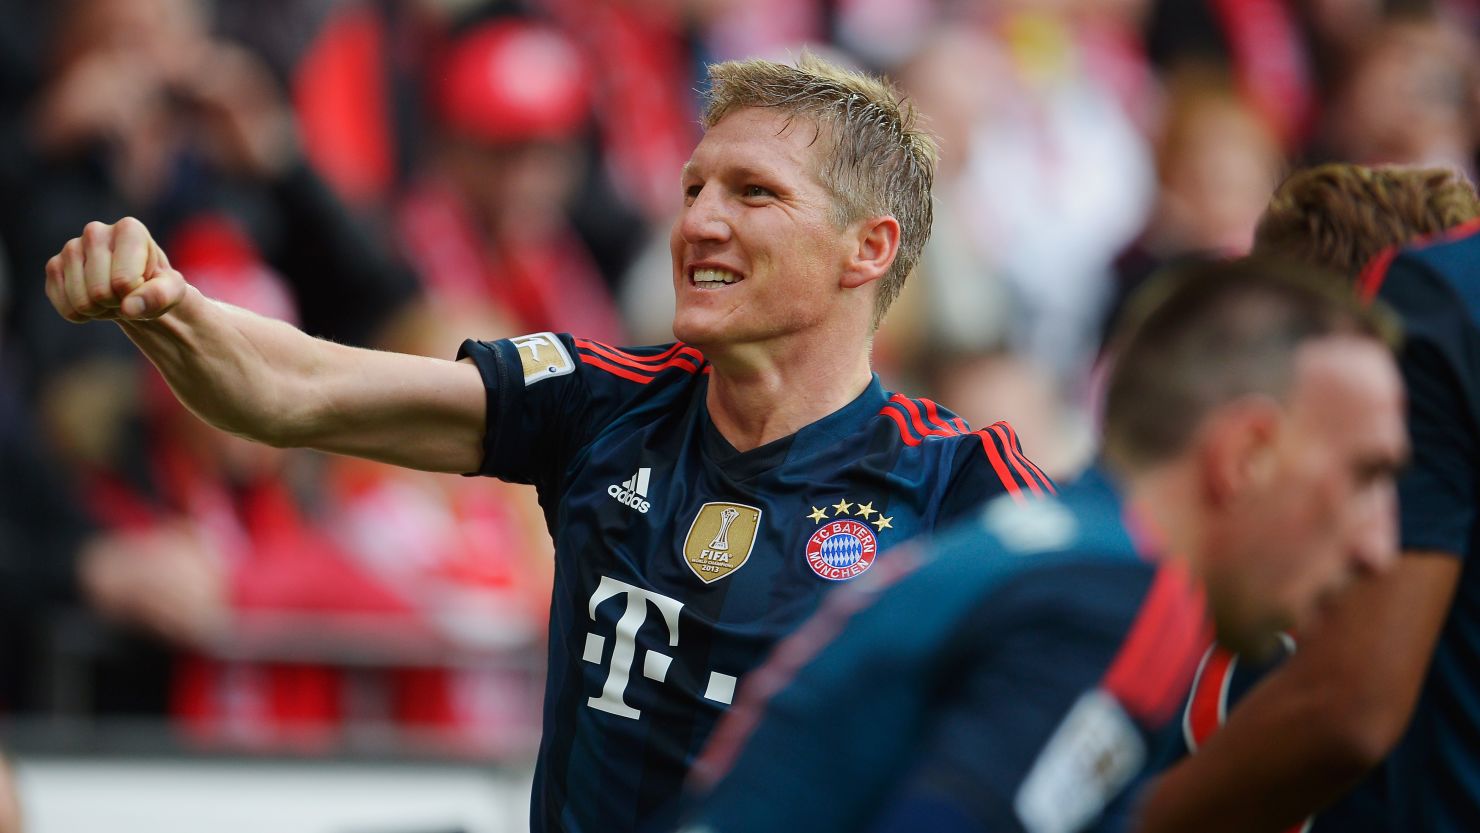 Bastian Schweinsteiger punches the air in relief and delight after scoring a late goal against Mainz. 